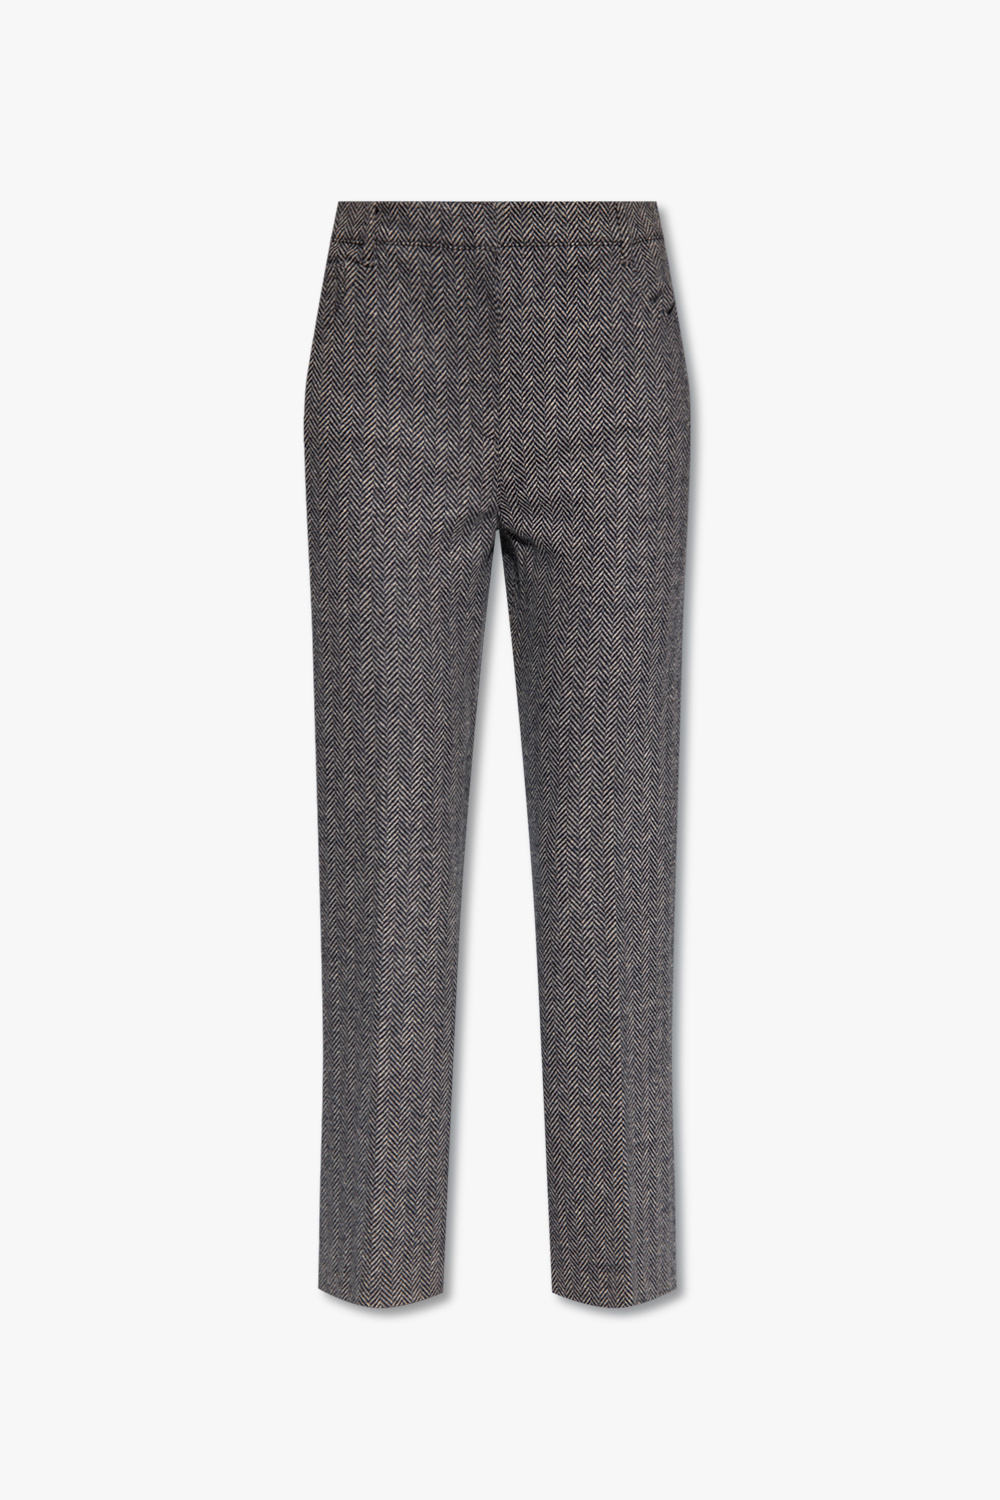 Women's Clothing, Theory Patterned trousers, GenesinlifeShops